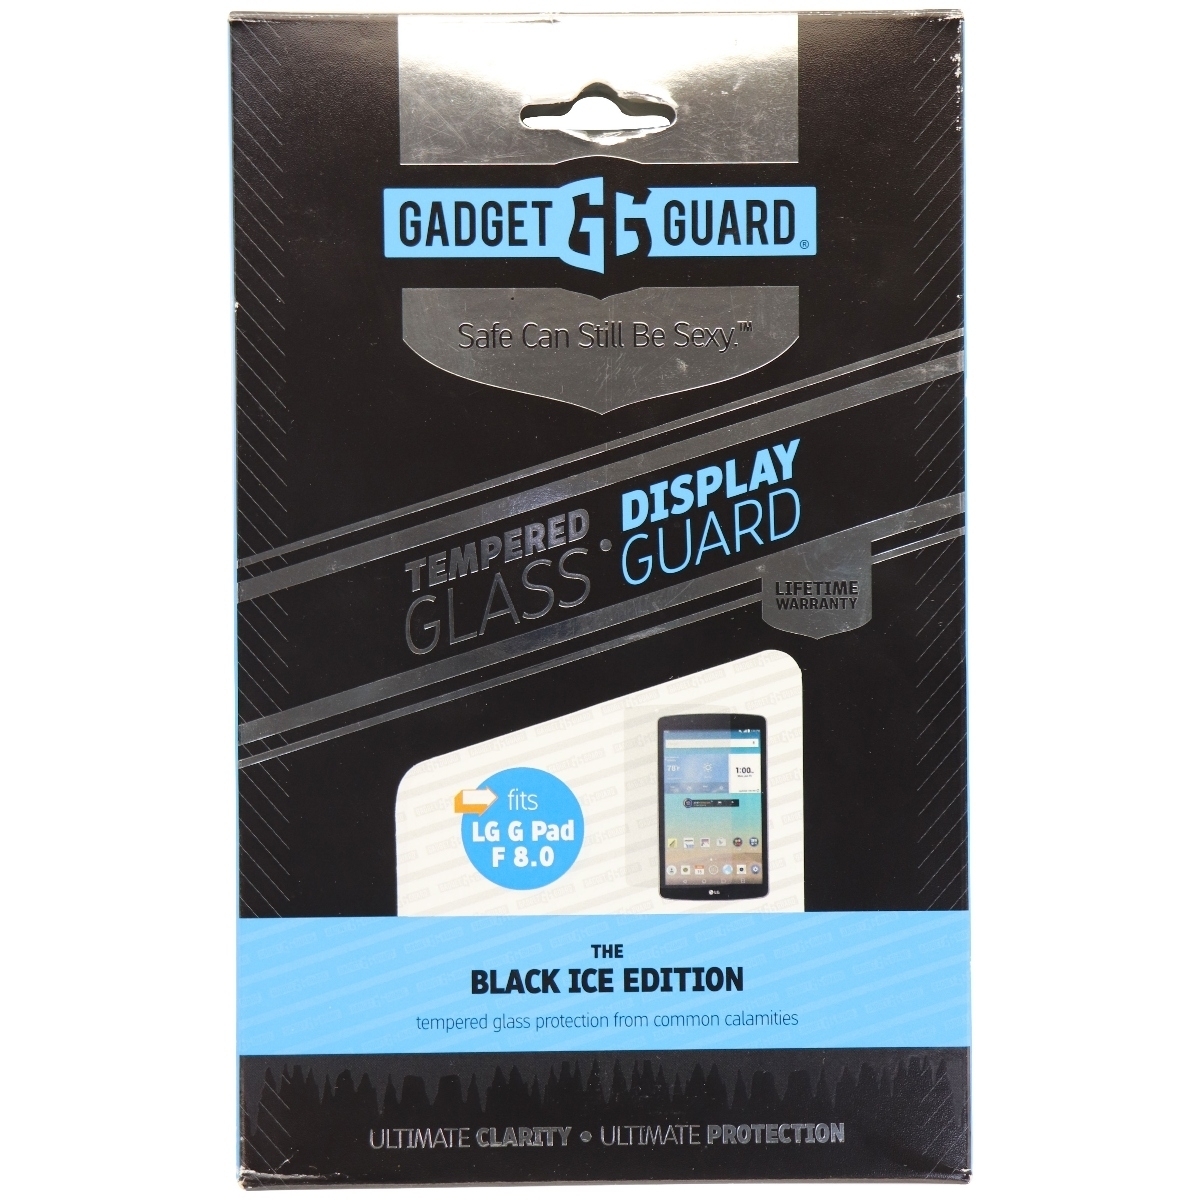 Gadget Guard Black Ice Tempered Glass Screen Protector For LG G Pad 8.0 - Clear